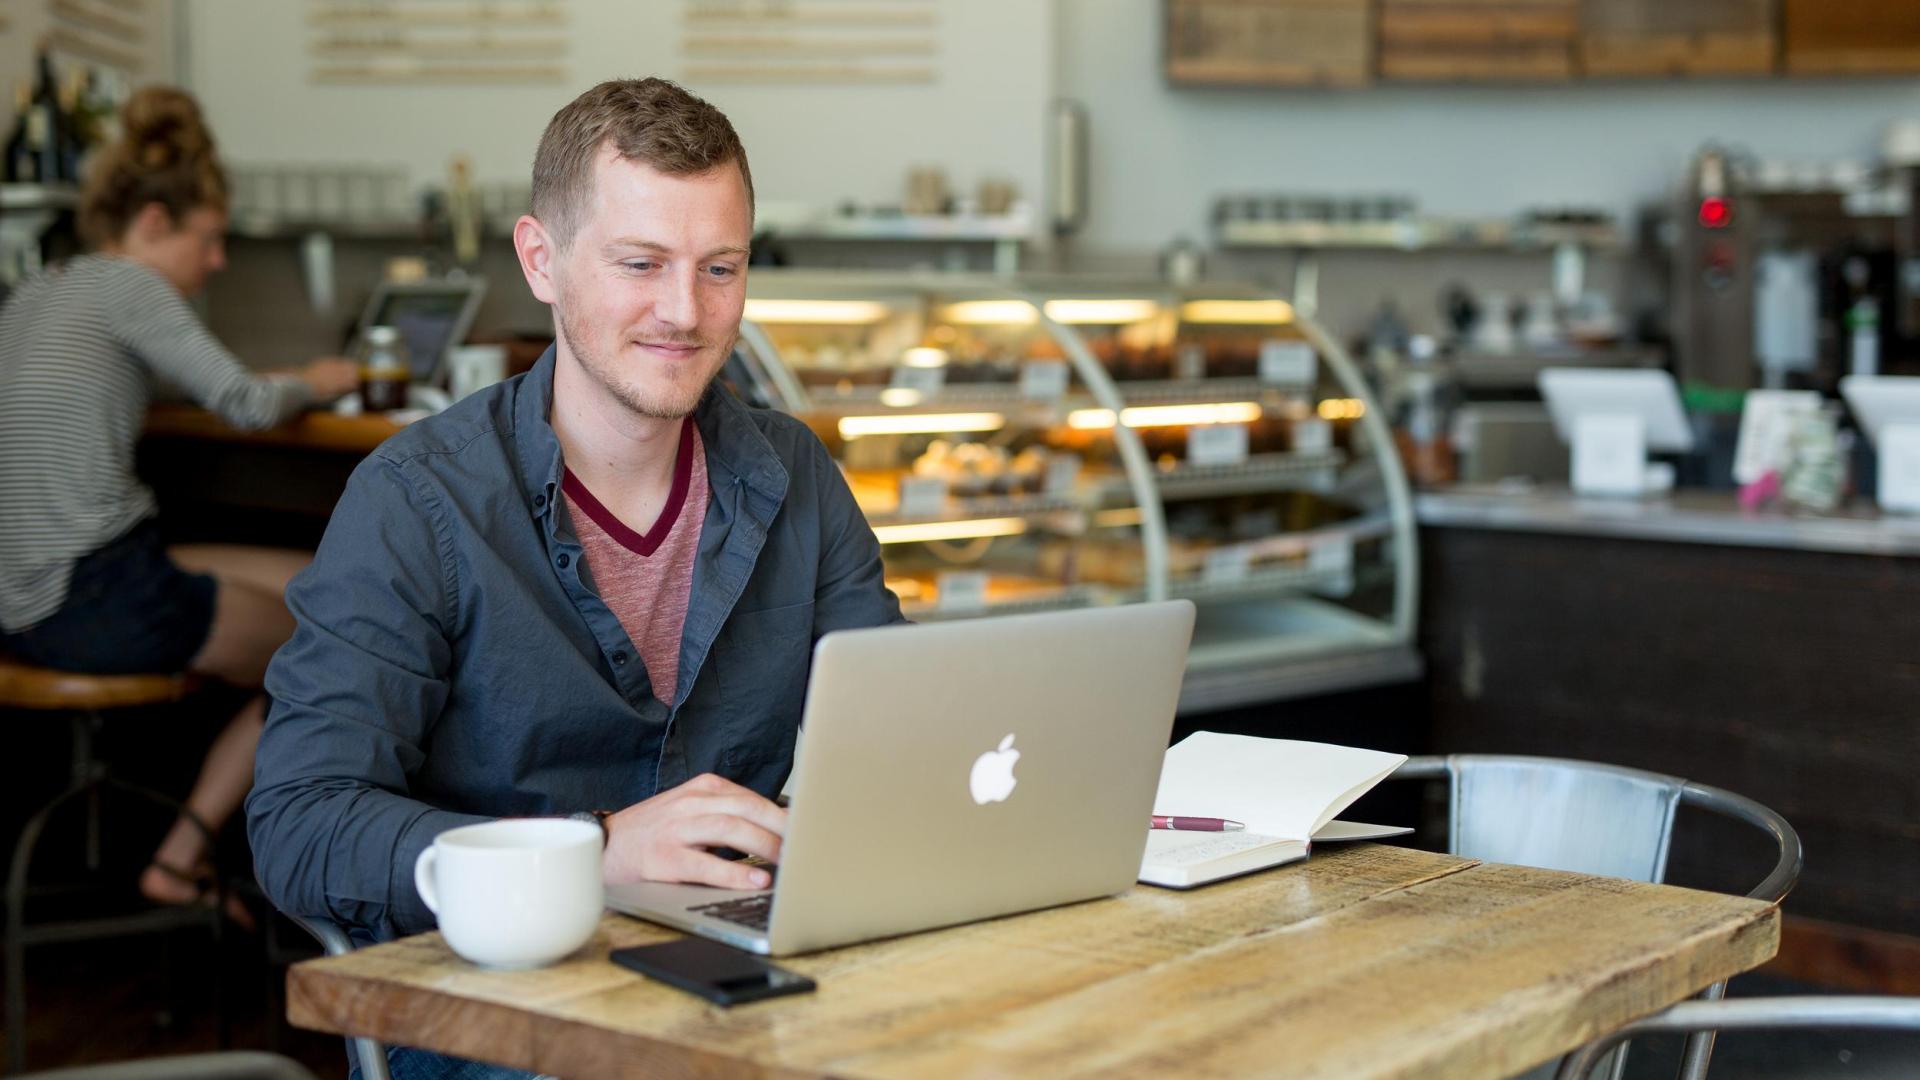 Online degree completion student at coffeeshop